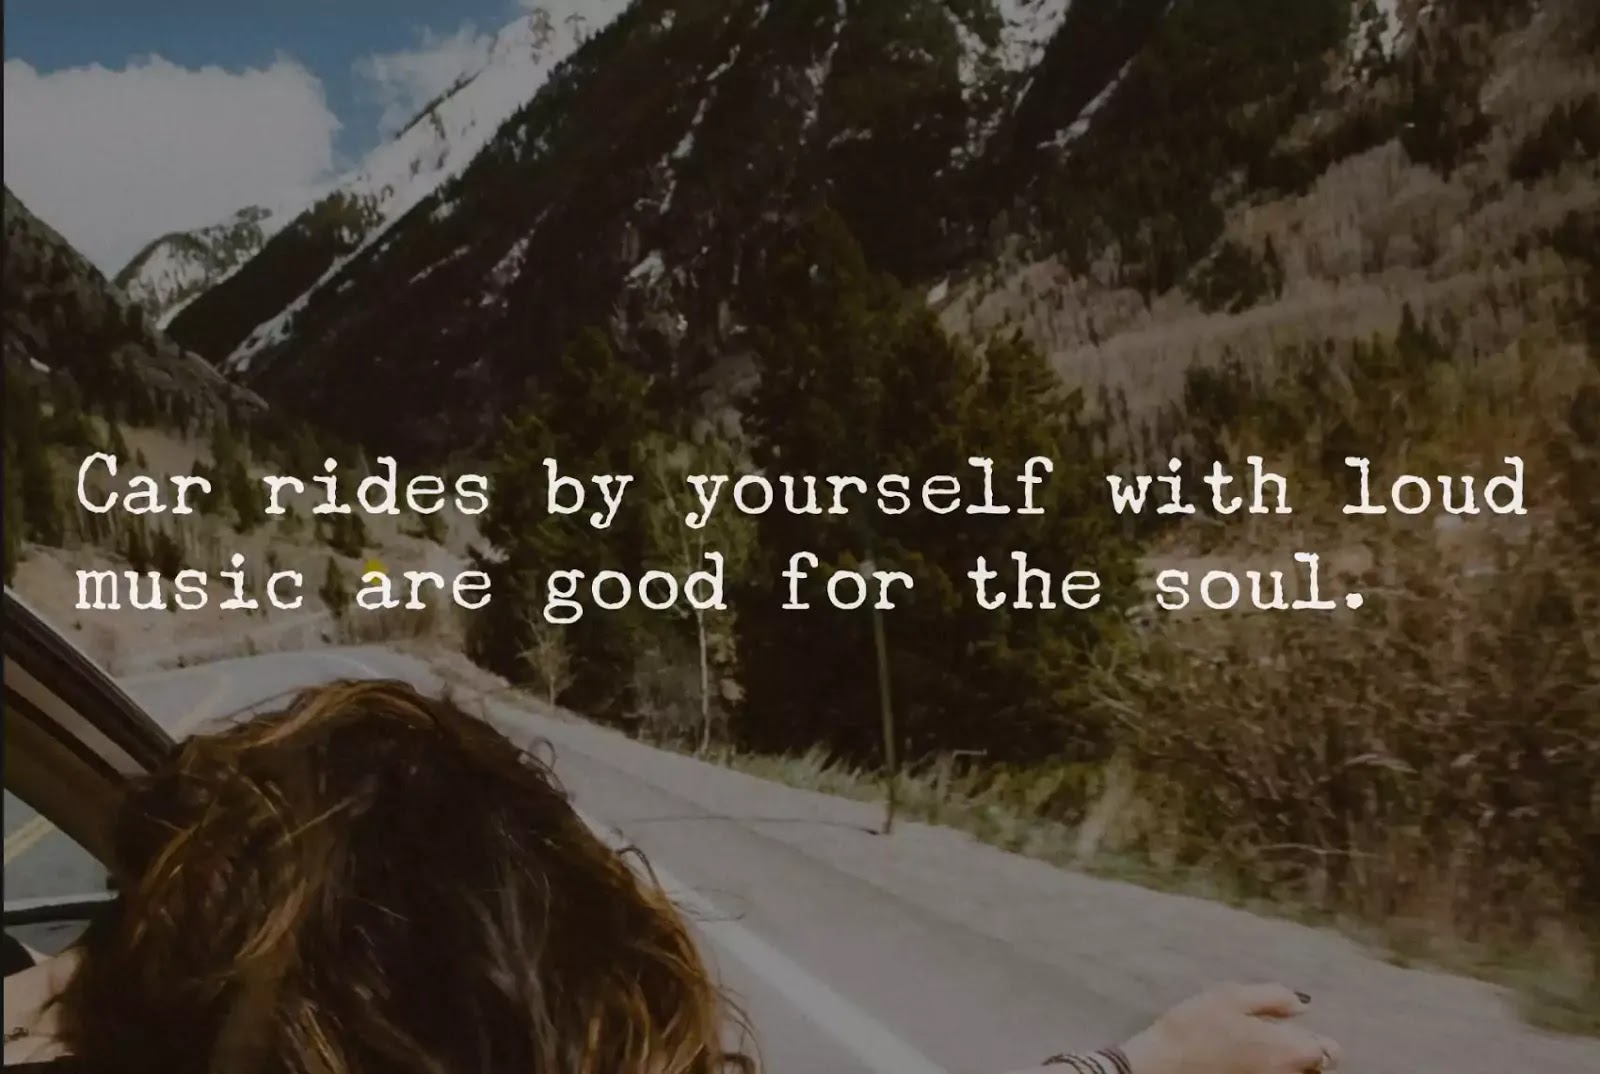 9 Reasons Why You Should Travel Alone At Least Once in Your Life